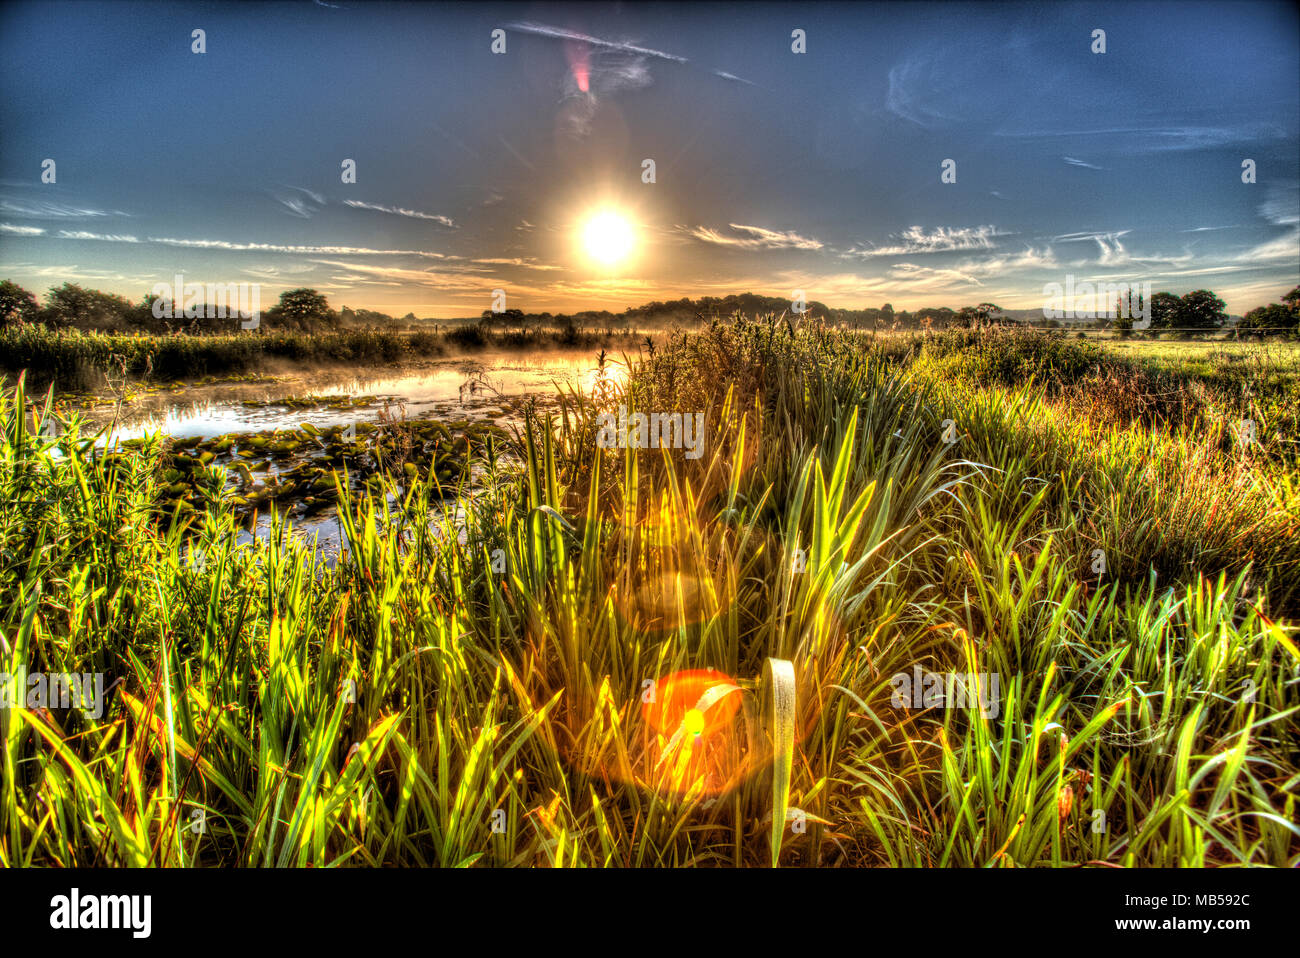 Village of Coddington, England. Artistic sunrise view of a freshwater pond in a Cheshire farming field. Stock Photo